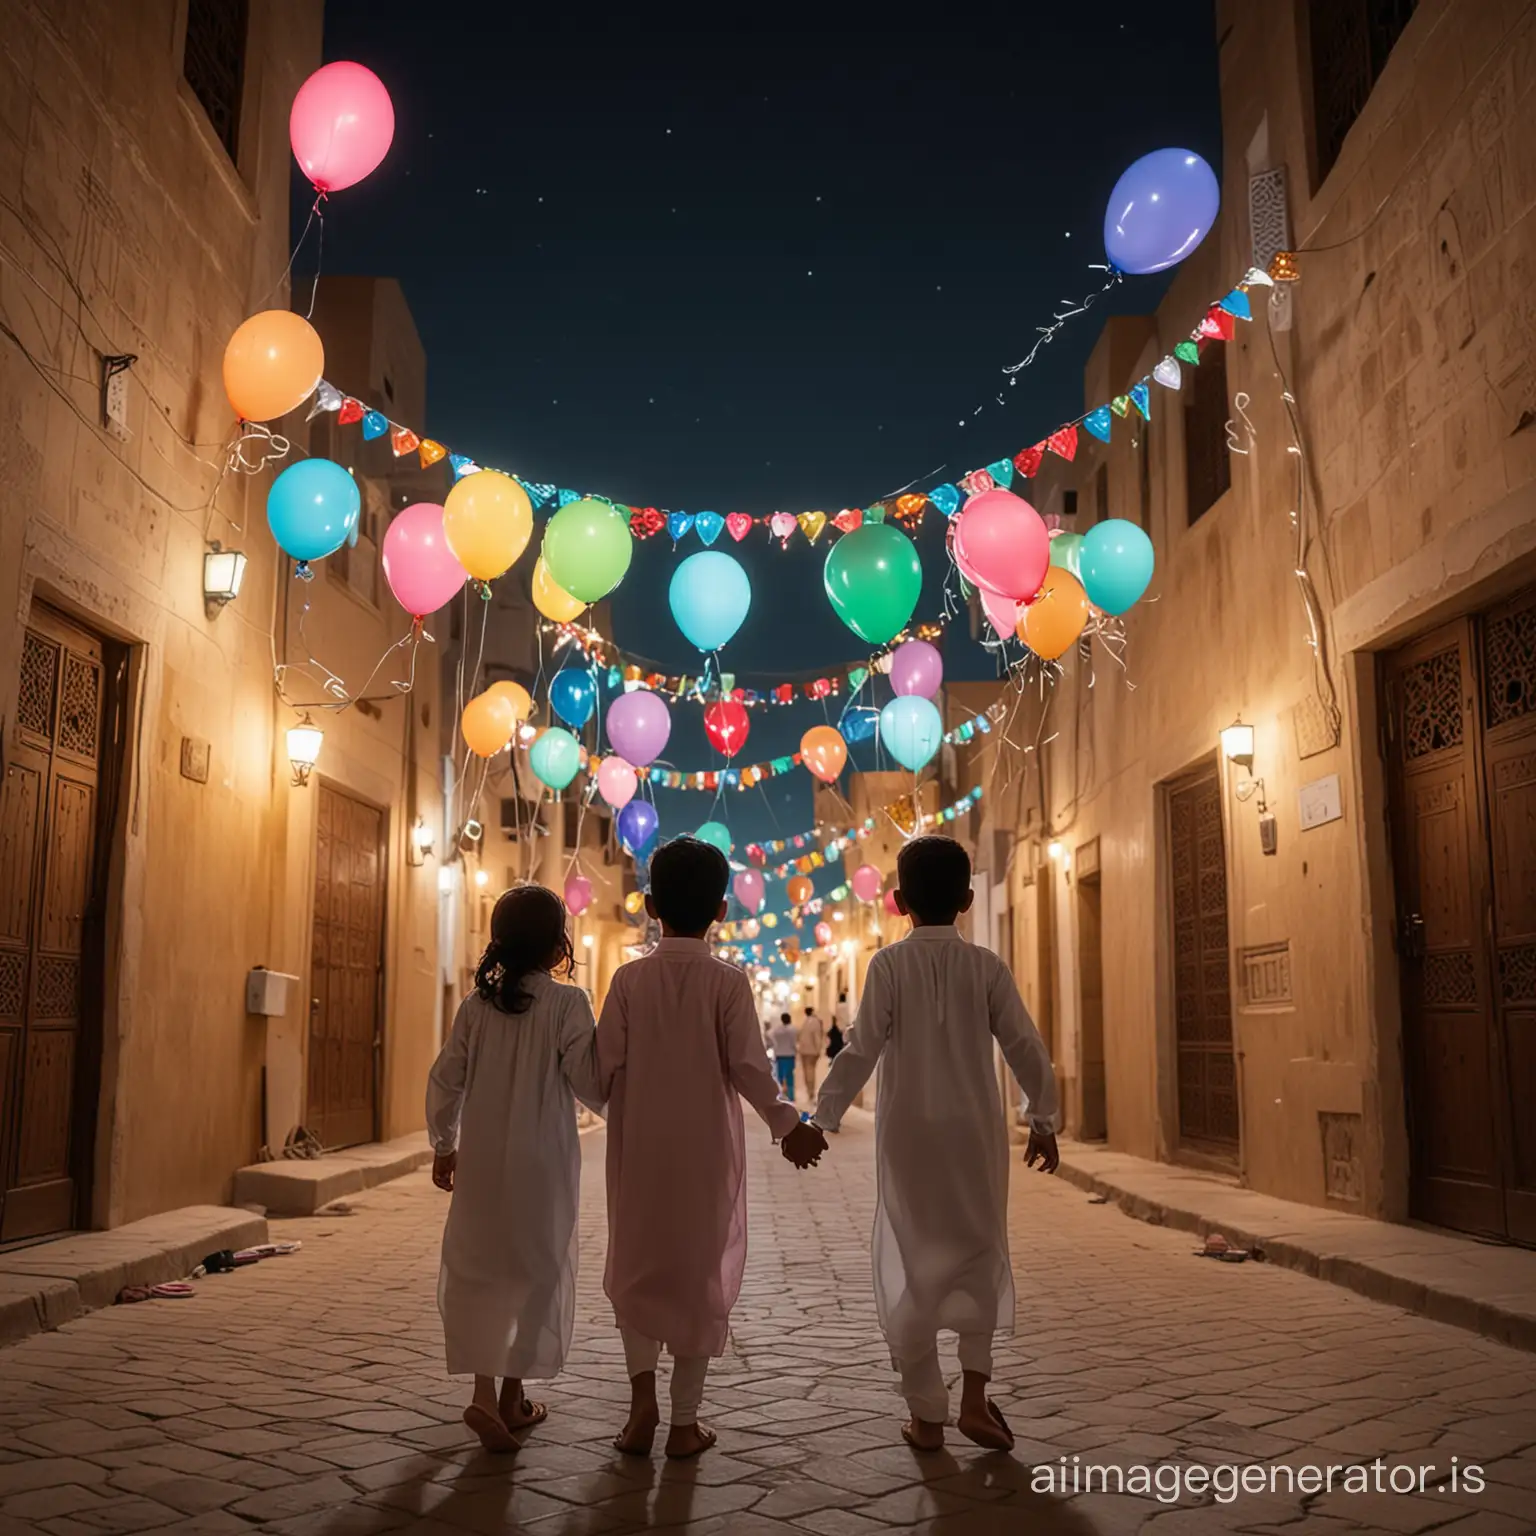 back view Joyful Arab Children Celebrating Eid ul Fitr with Balloons and Candy at Night